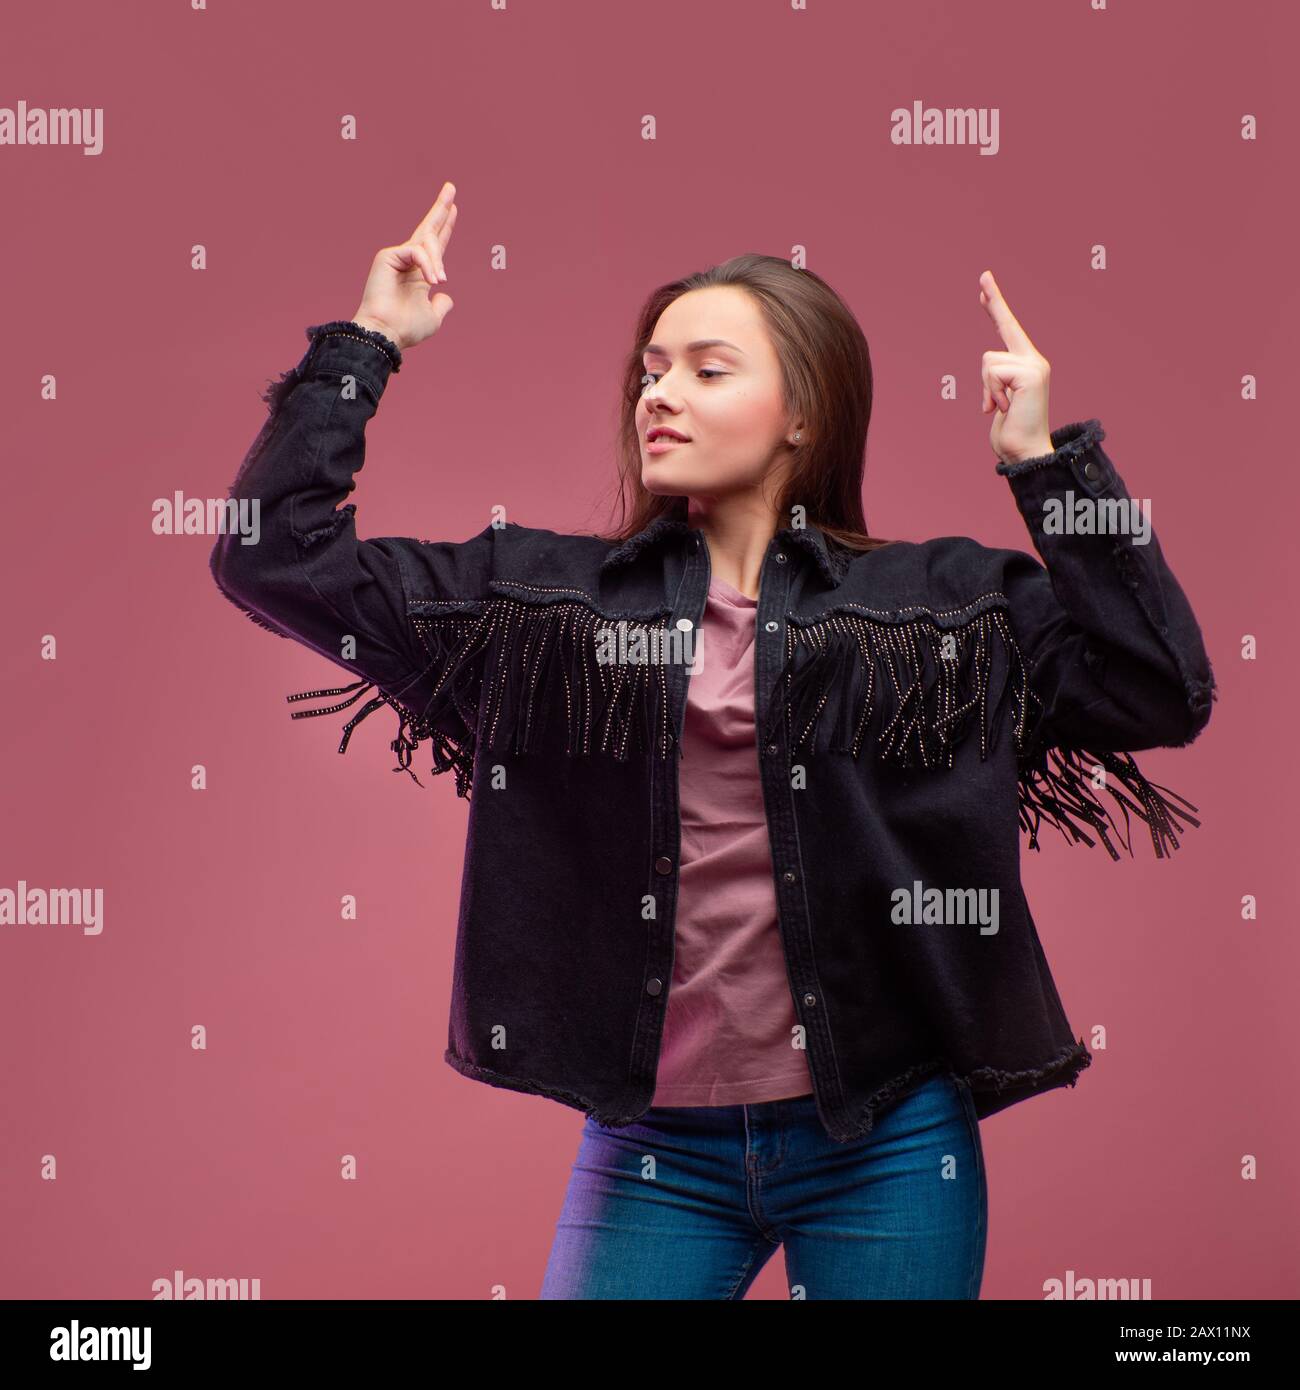 Young brunette woman on pink background. Studio portrait, informal style of clothing, jeans and a cowboy shirt with fringe. Stock Photo